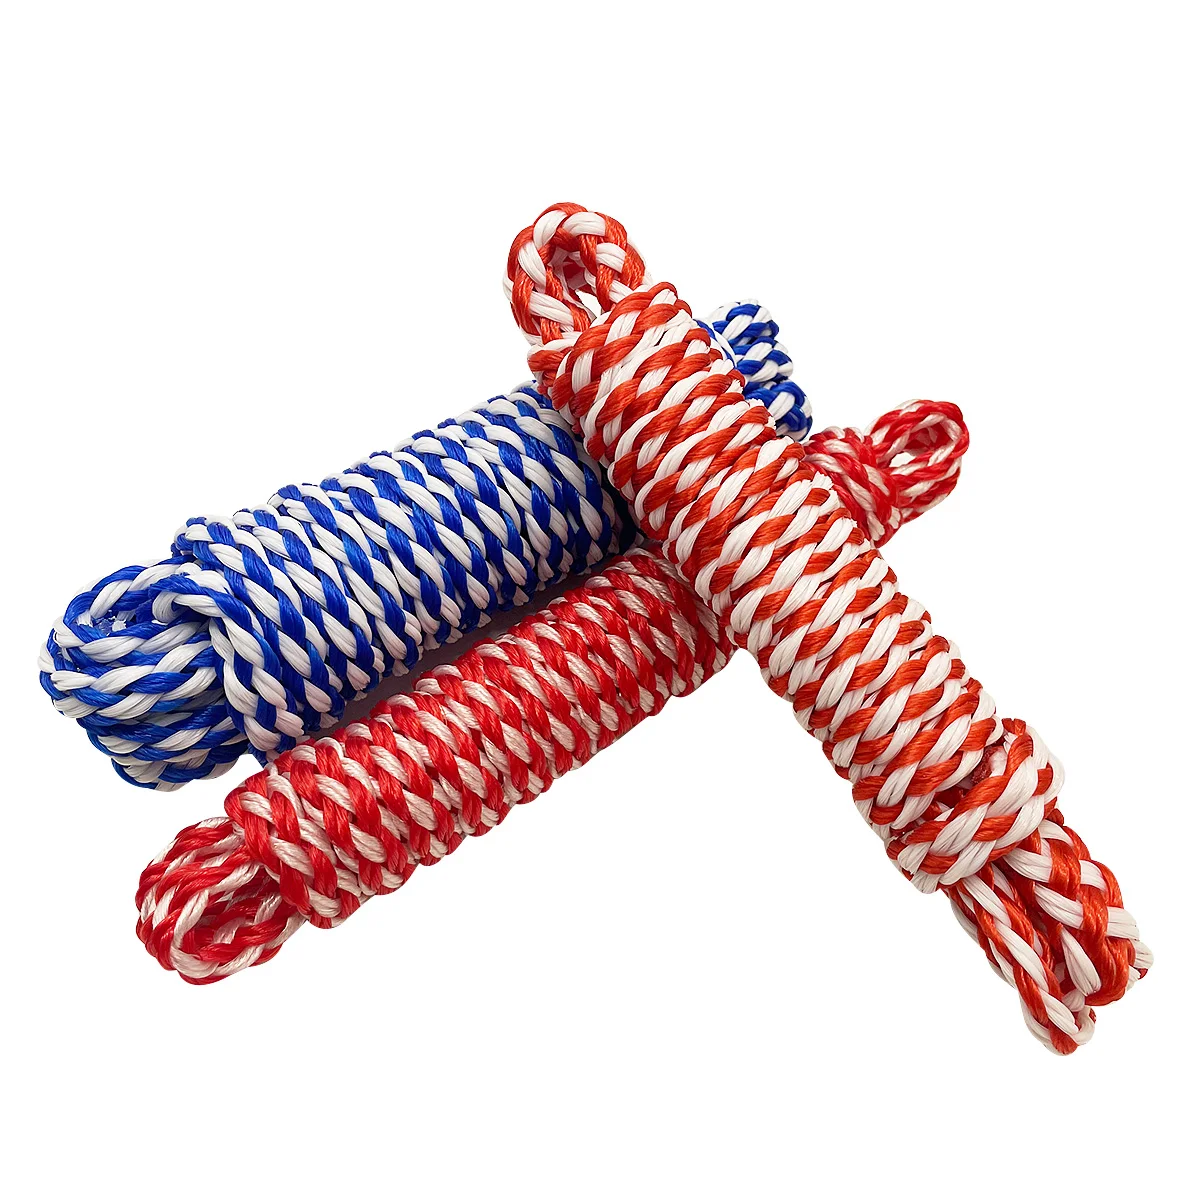 PP PE floating hollow braid rope for water ski rope